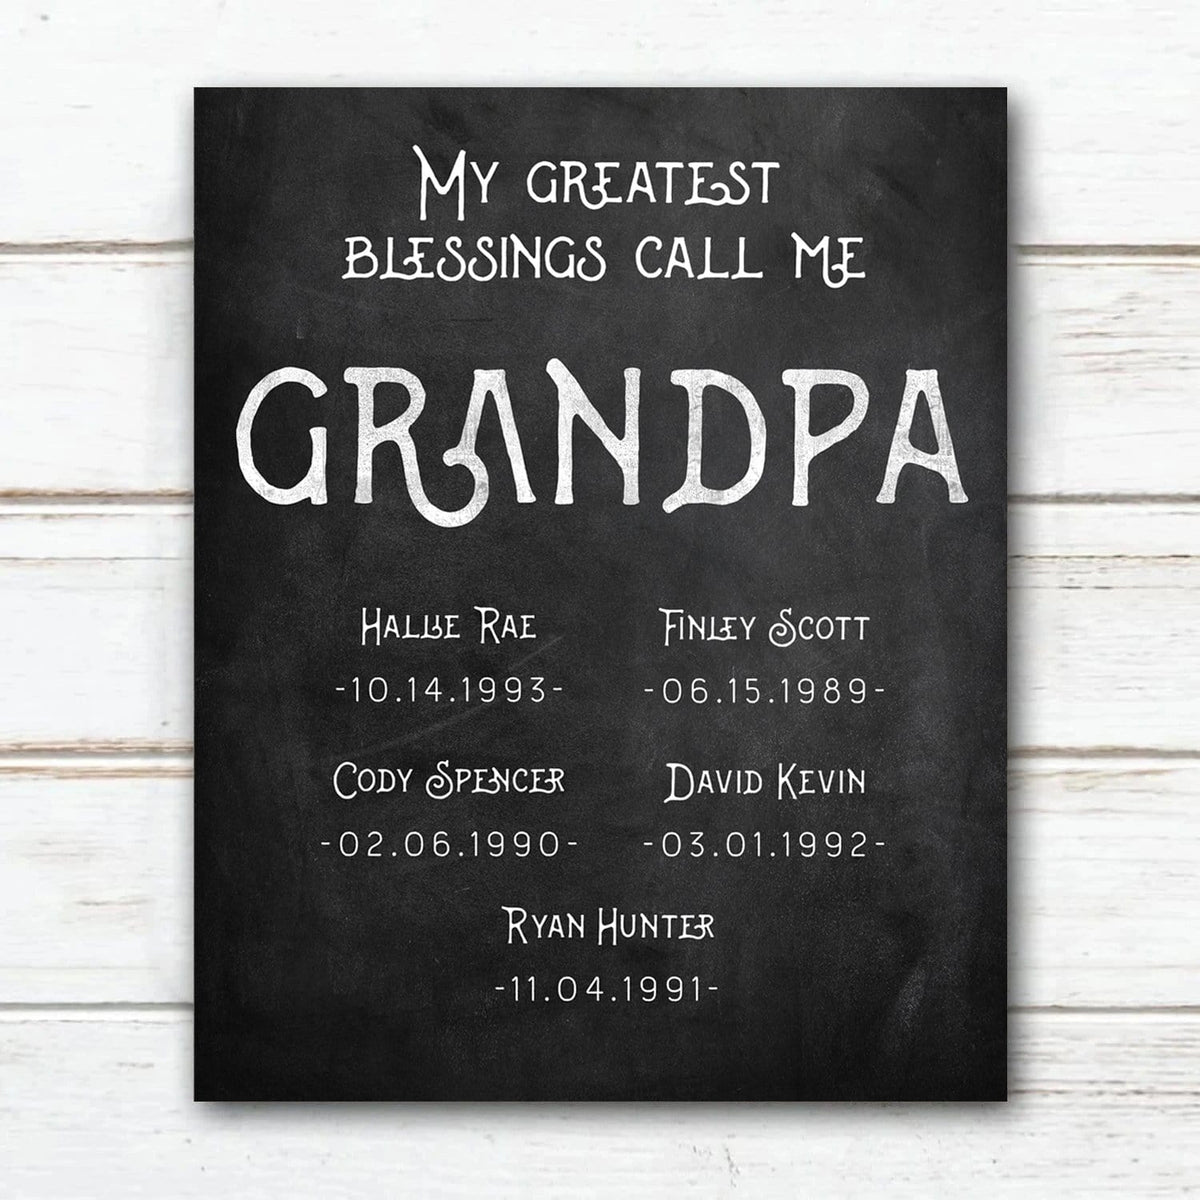 Personalized Grandpa Wood sign with name of Grandkids